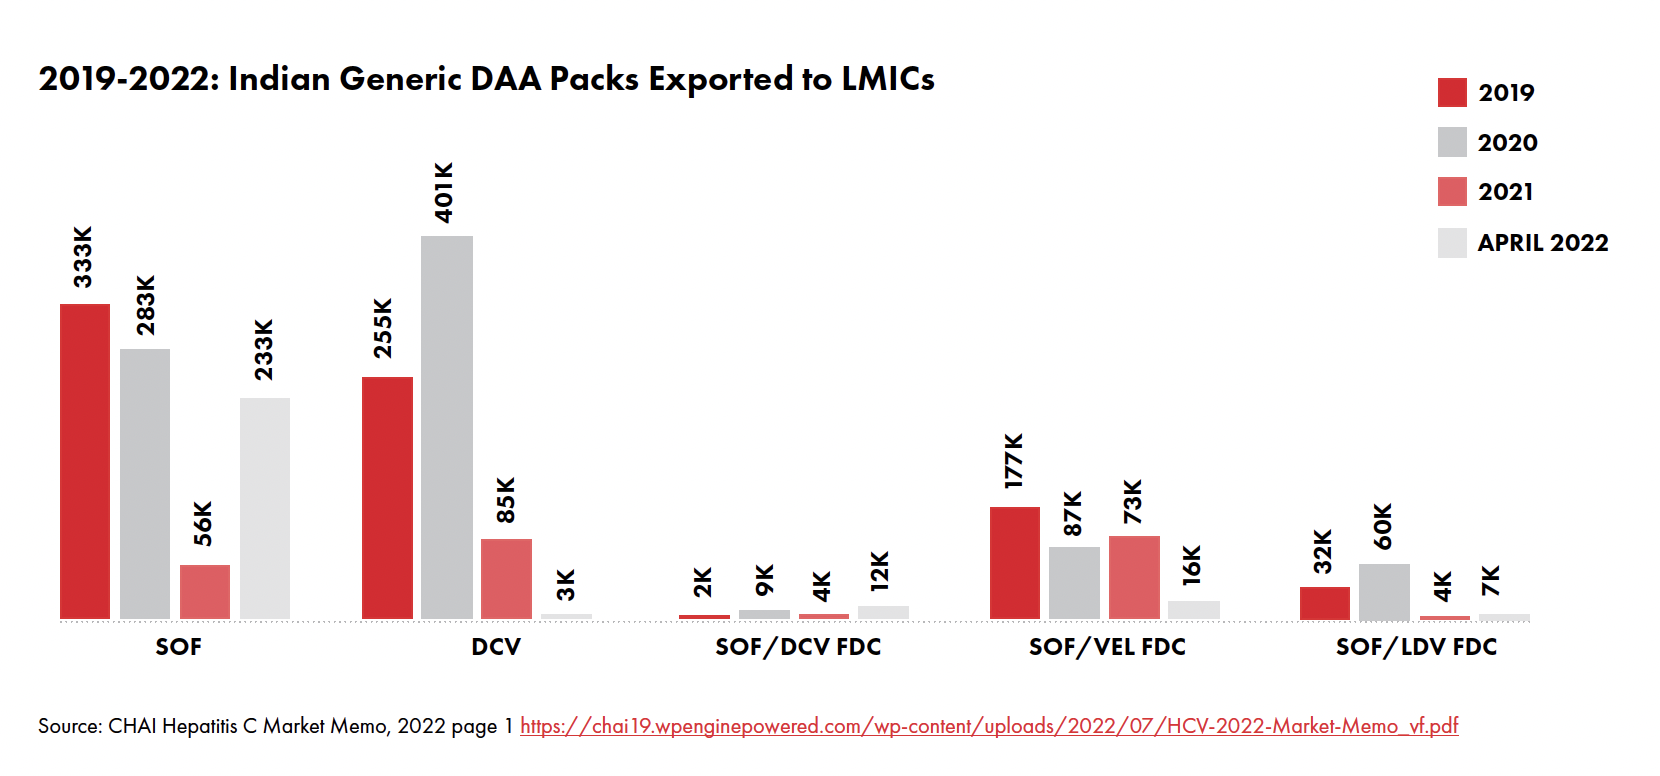 Graphic showing 2019-2022: Indian Generic DAA Packs Exported to LMICs